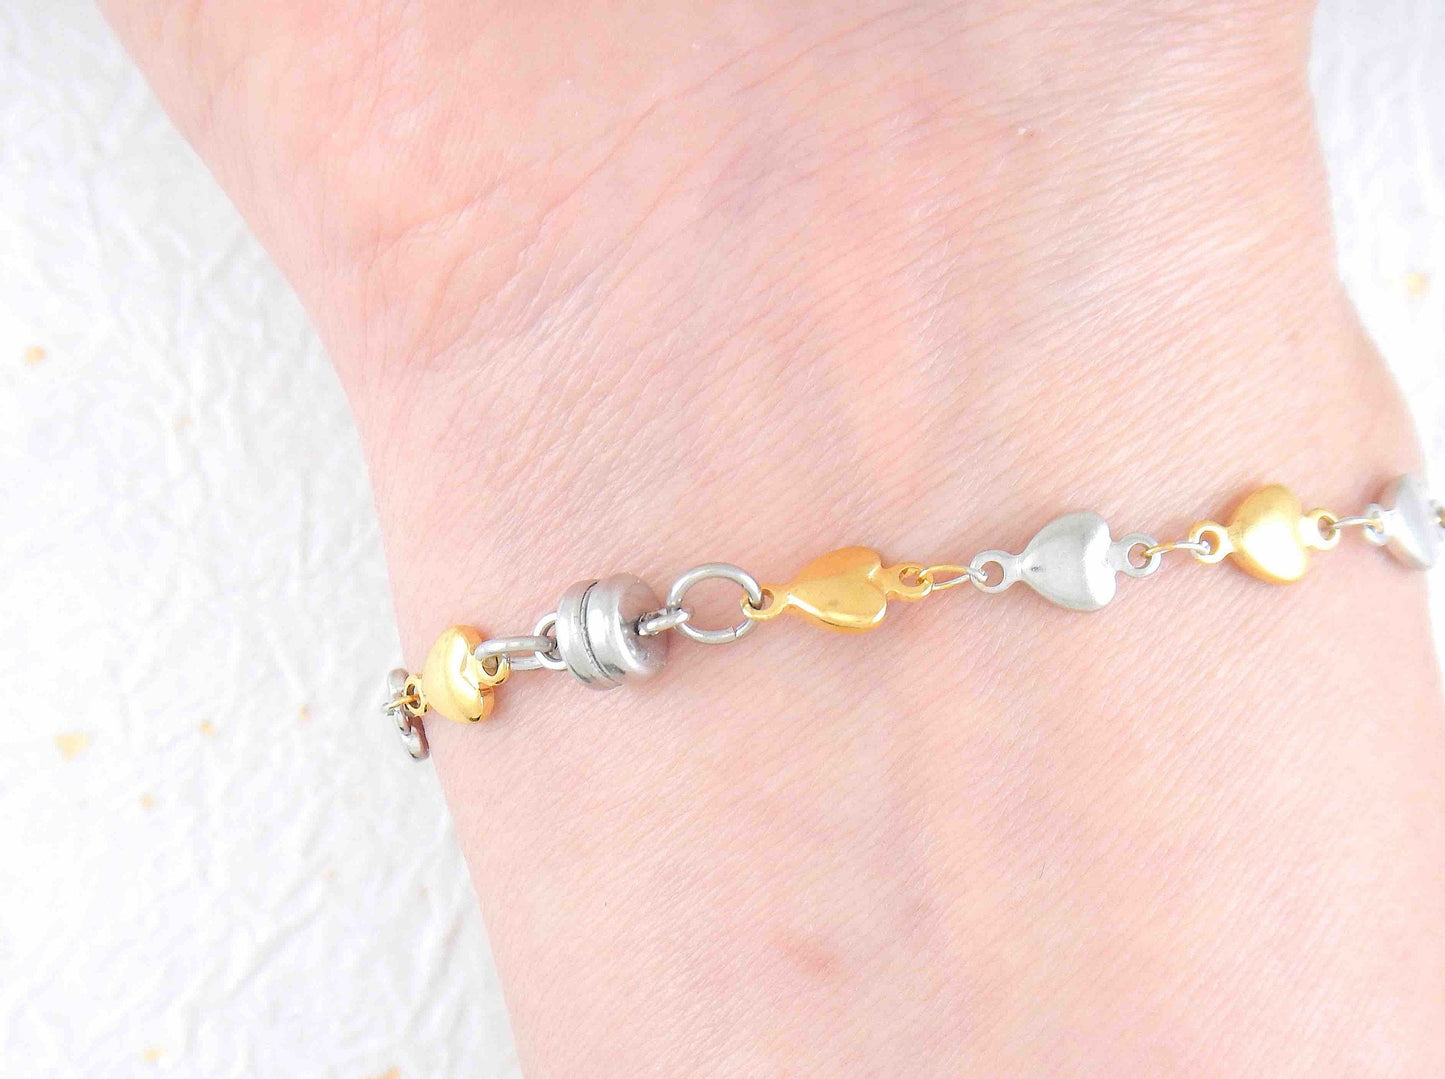 Bracelet with alternating tiny gold and silver hearts, magnetic clasp, all hypo allergenic stainless steel